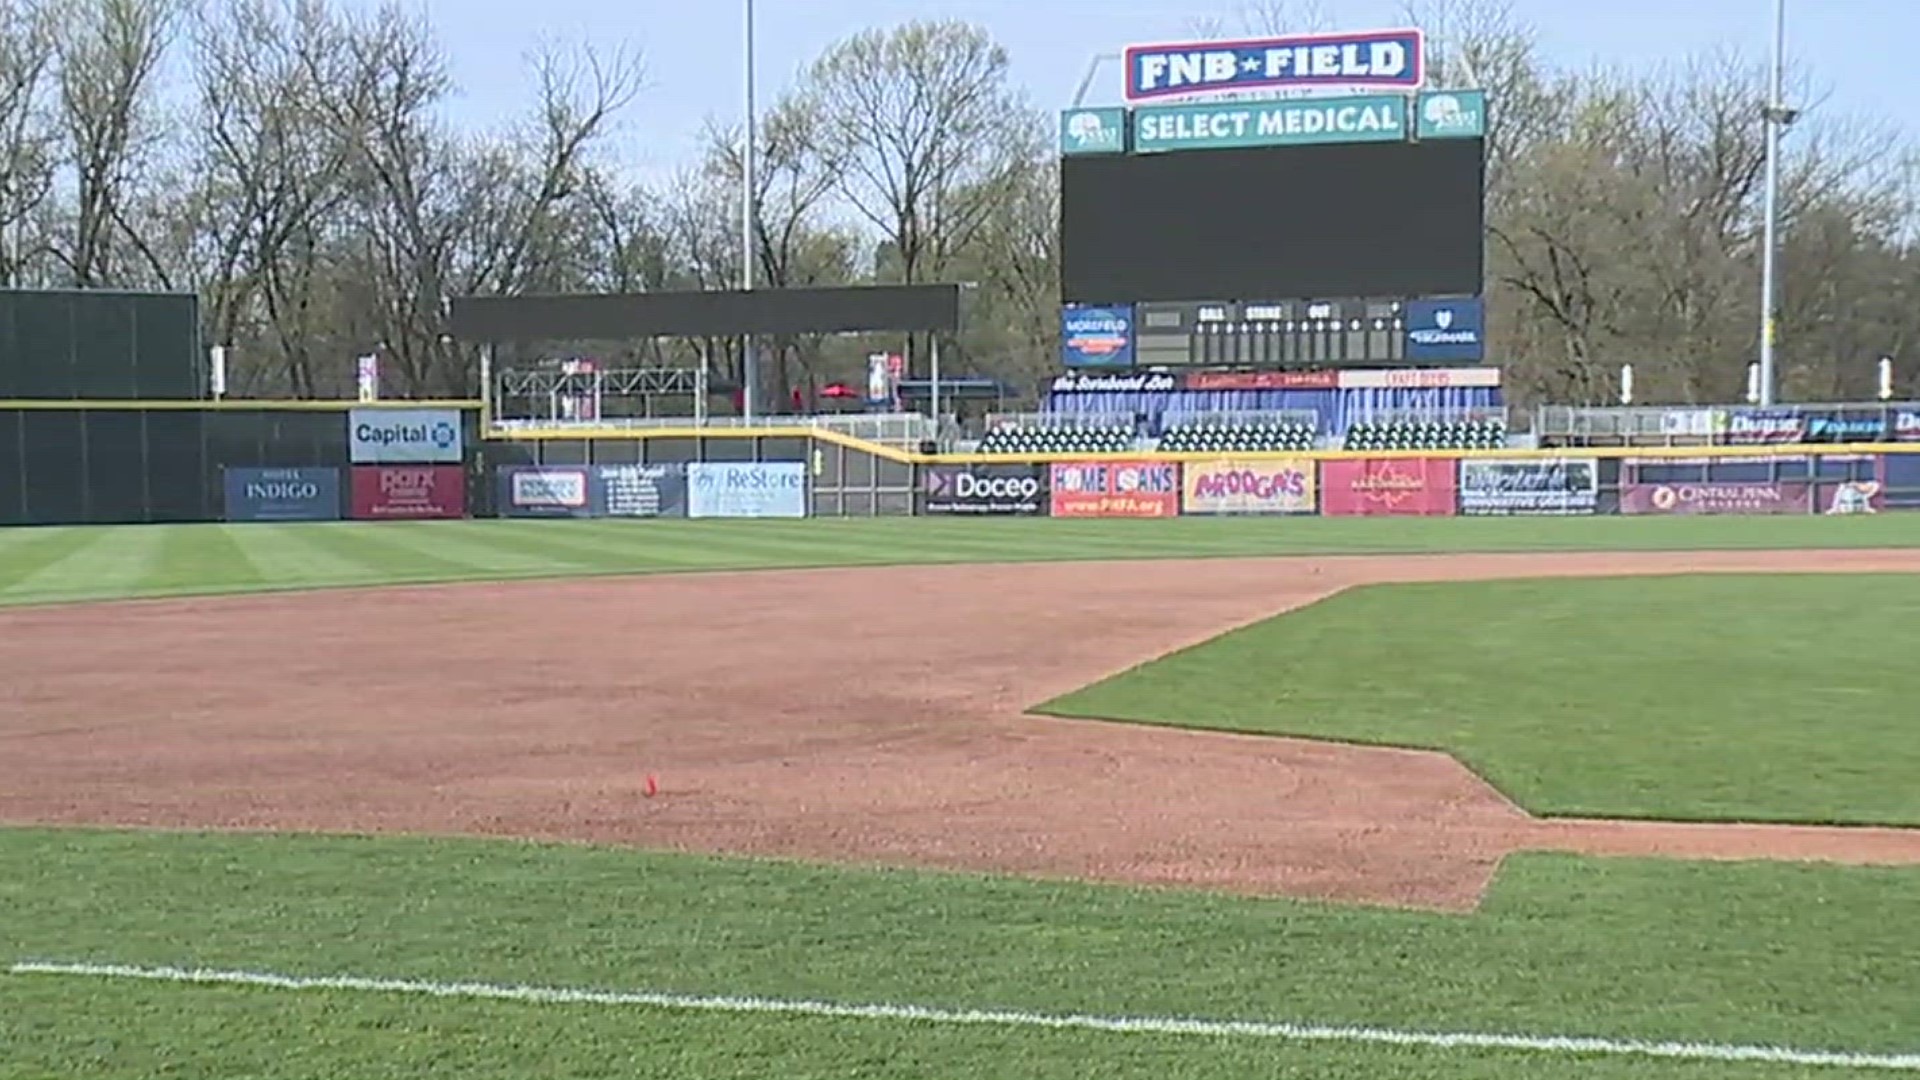 The Harrisburg Senators will take on the Richmond Flying Squirrels at FNB Field on Tuesday for their opening day.